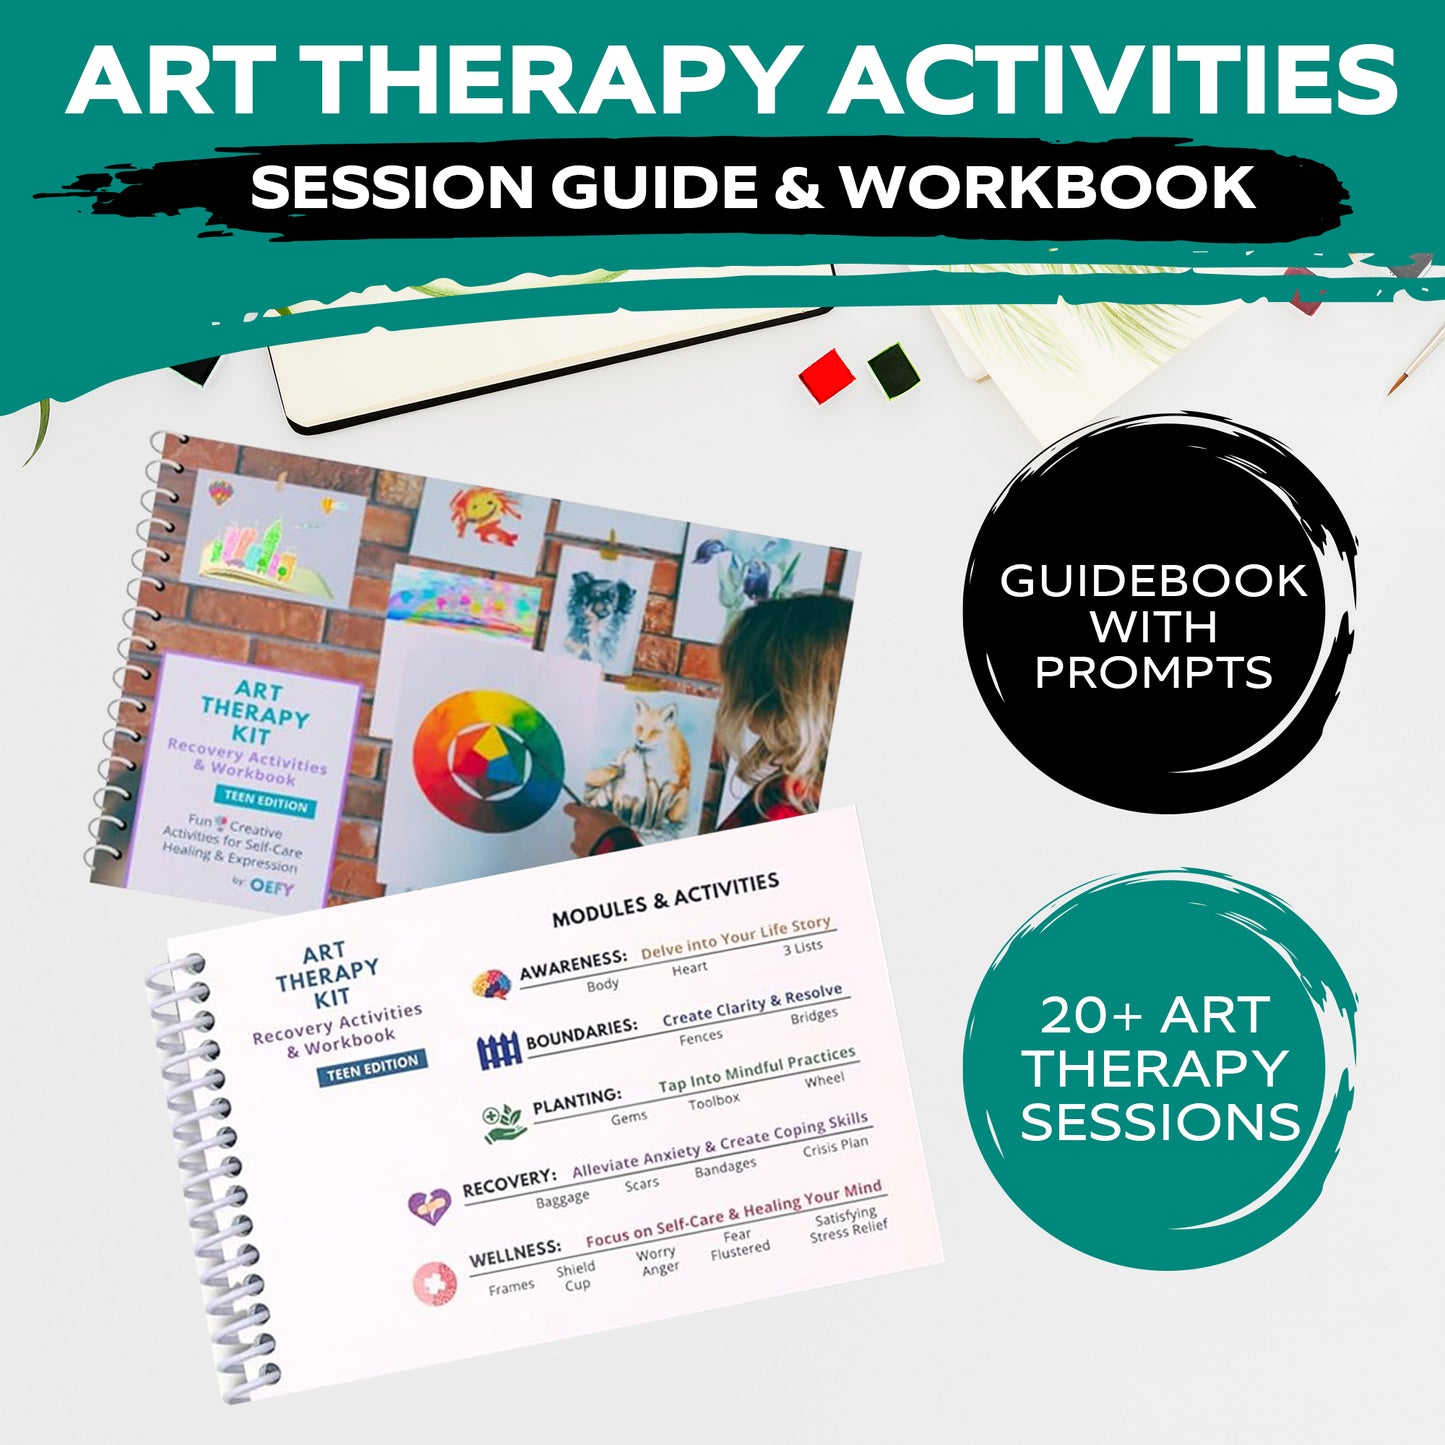 Expressive Art Therapy Supplies Kit - 20+ Art Therapy Activities, Alternative Art Projects - Anxiety Tools, Coping Skills, Clarify Thoughts, Therapy Supplies for Emotional Health, Wellness Kit by Oefy